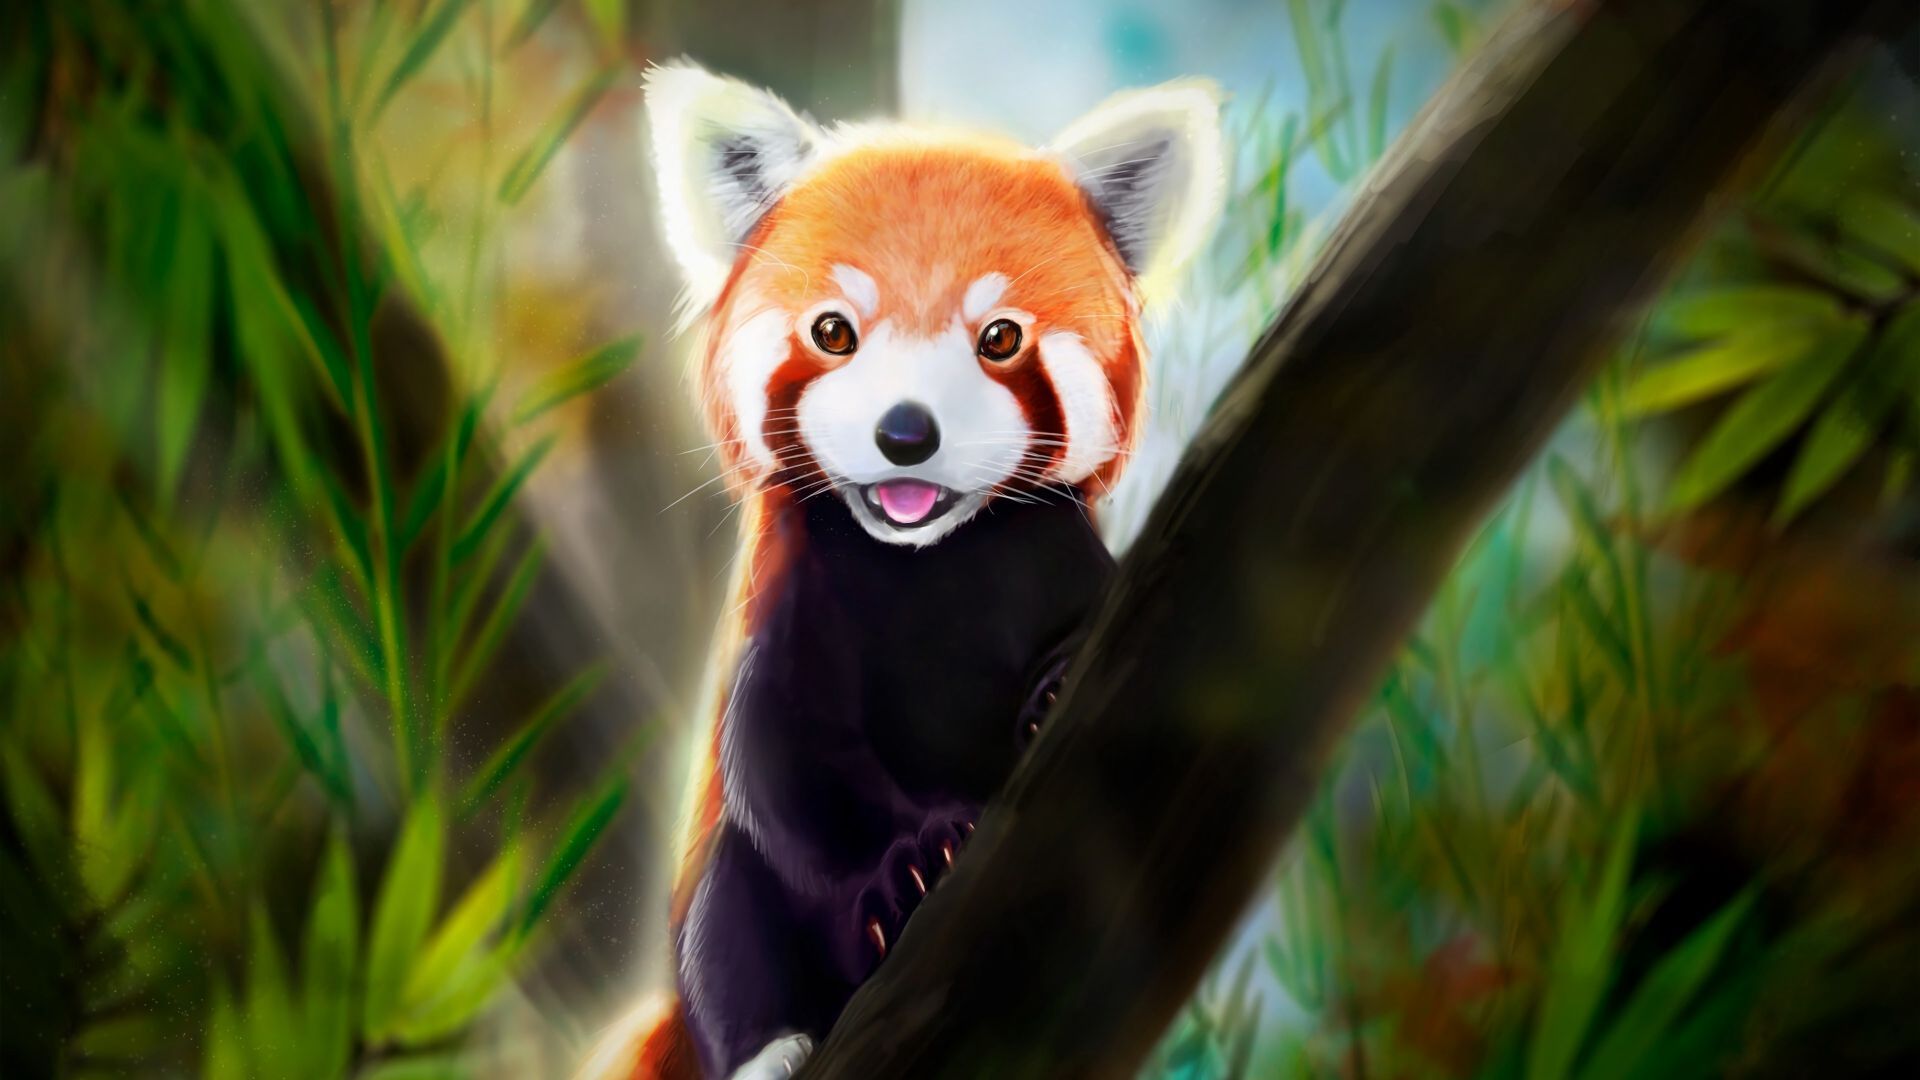 Cute, red panda, art wallpaper, HD image, picture, background, 4d1aaf